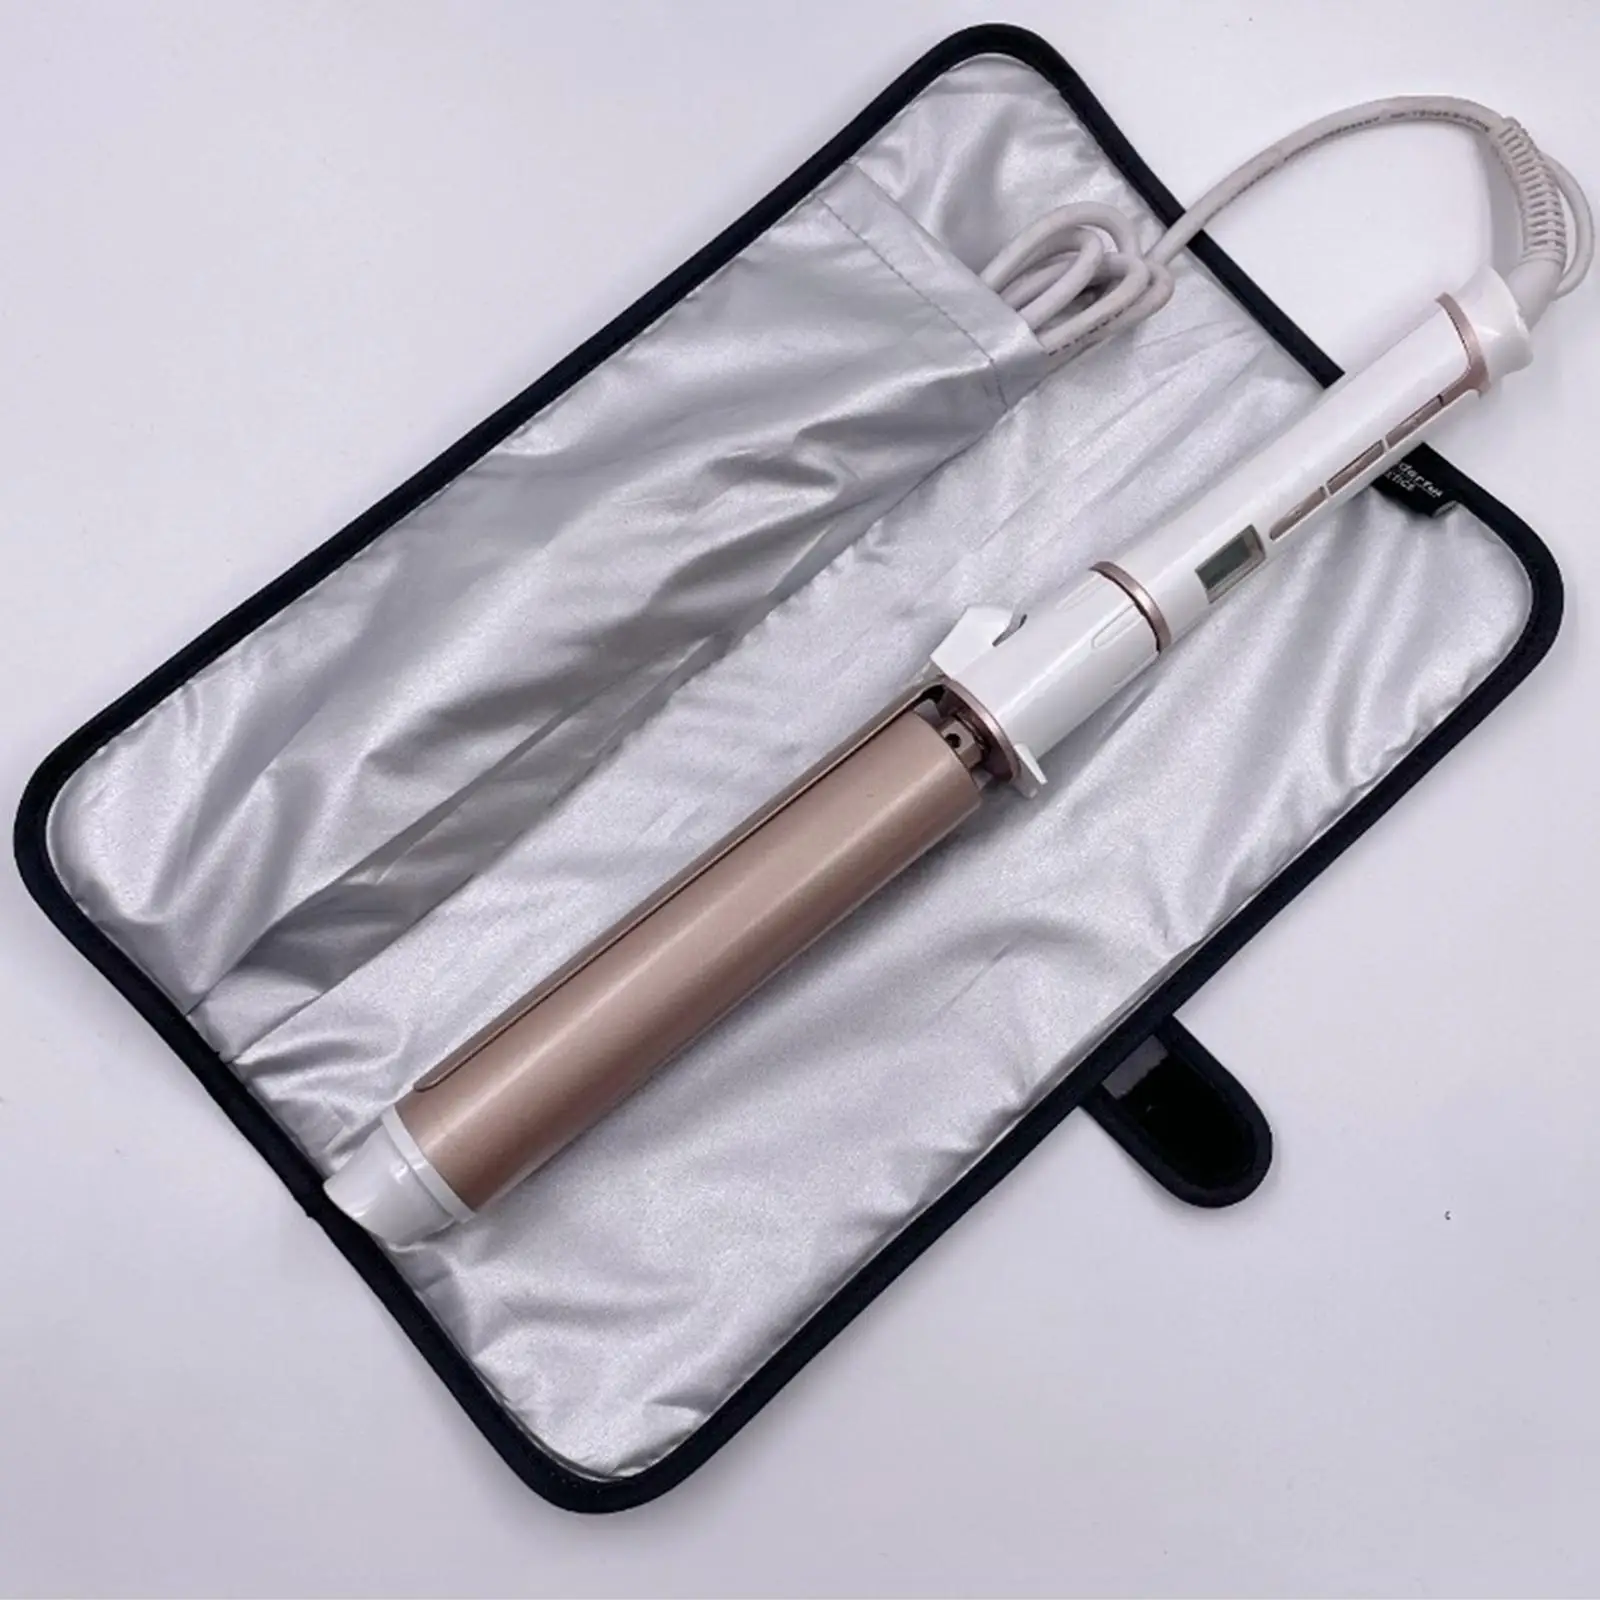 Curling Iron Cover Sleeve Accessory Professional Hair Tools Travel Bag for Curling Iron Combs Straighteners Clippers Flat Iron